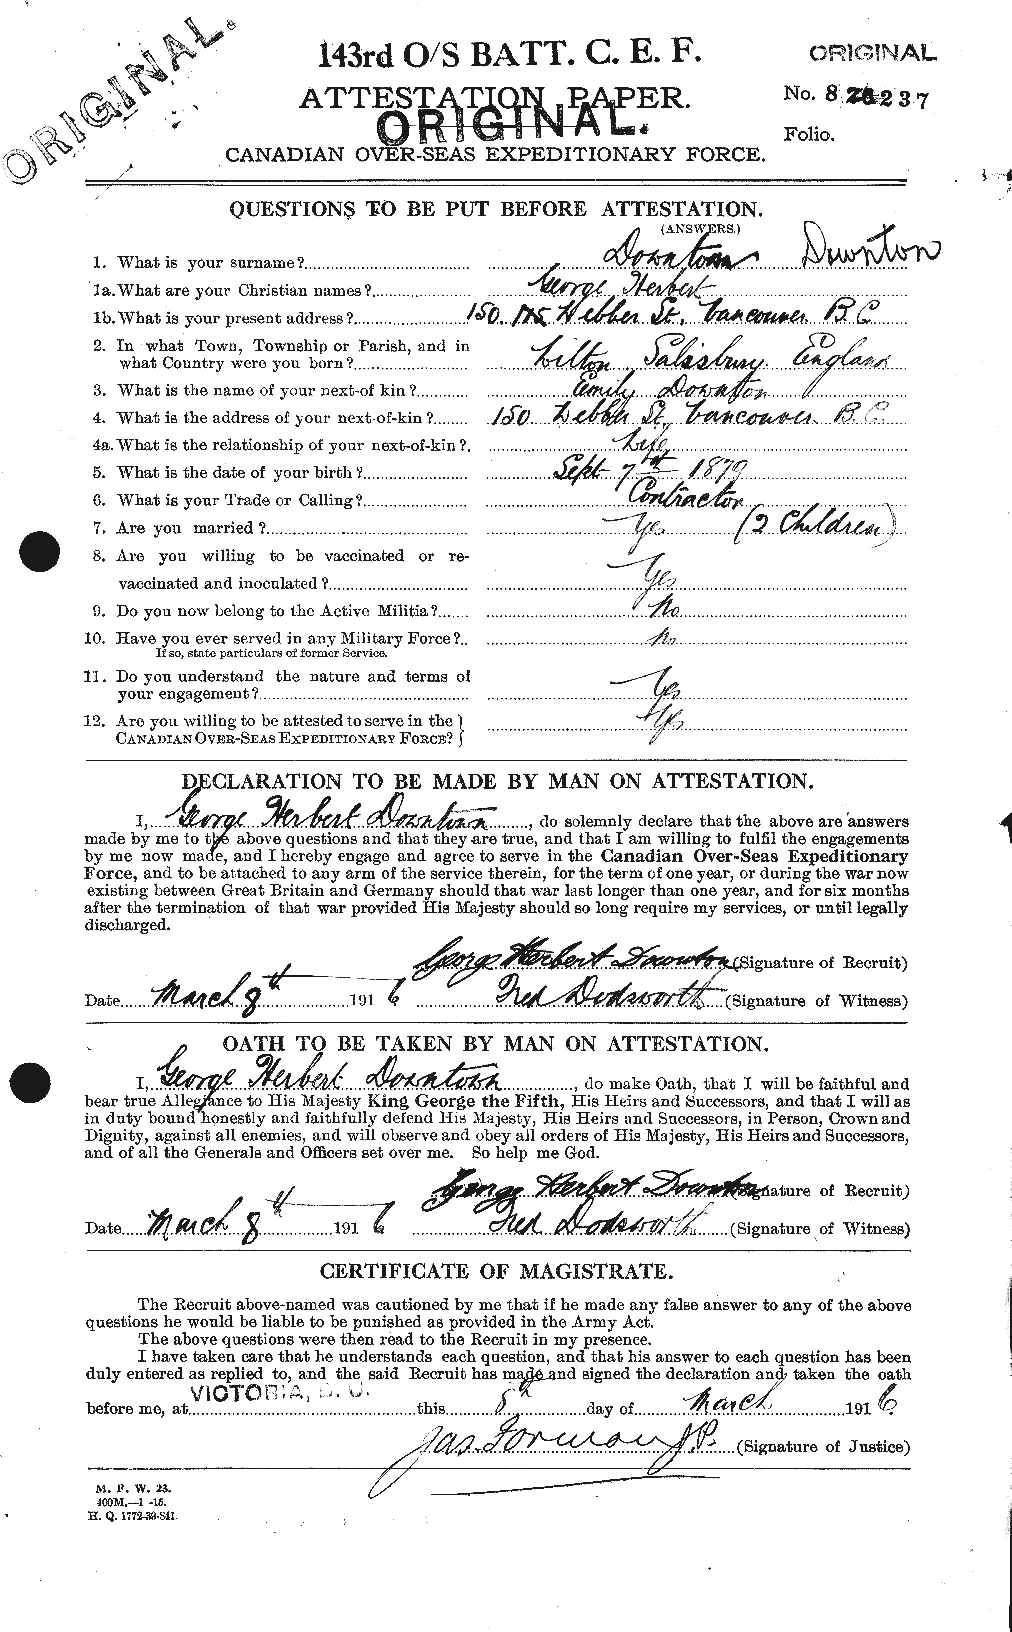 Personnel Records of the First World War - CEF 297345a